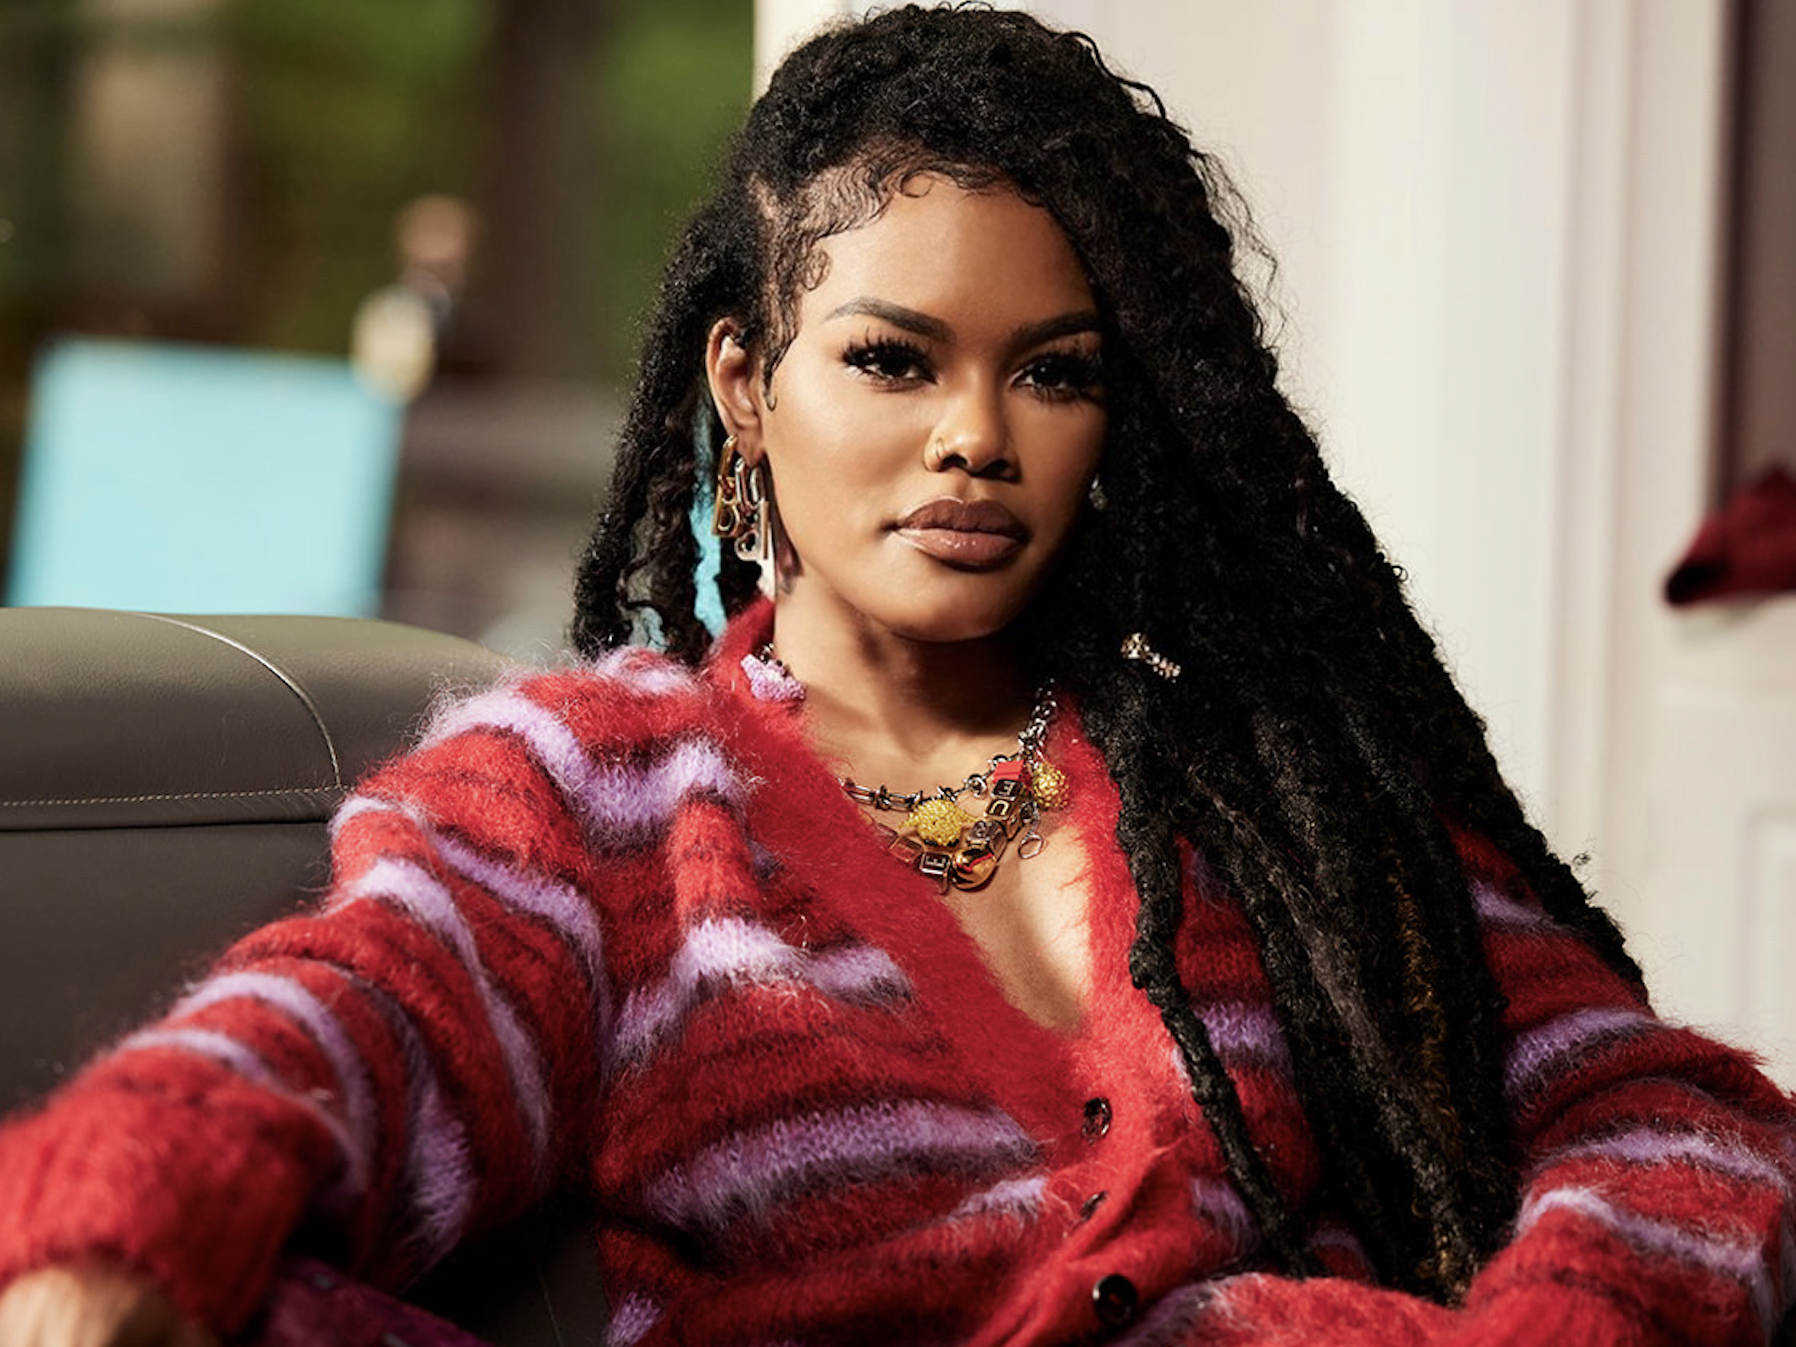 Teyana Taylor Opens Up About Facial Injectables: ‘It Was Super Quick And Wasn’t Even Really That Painful’